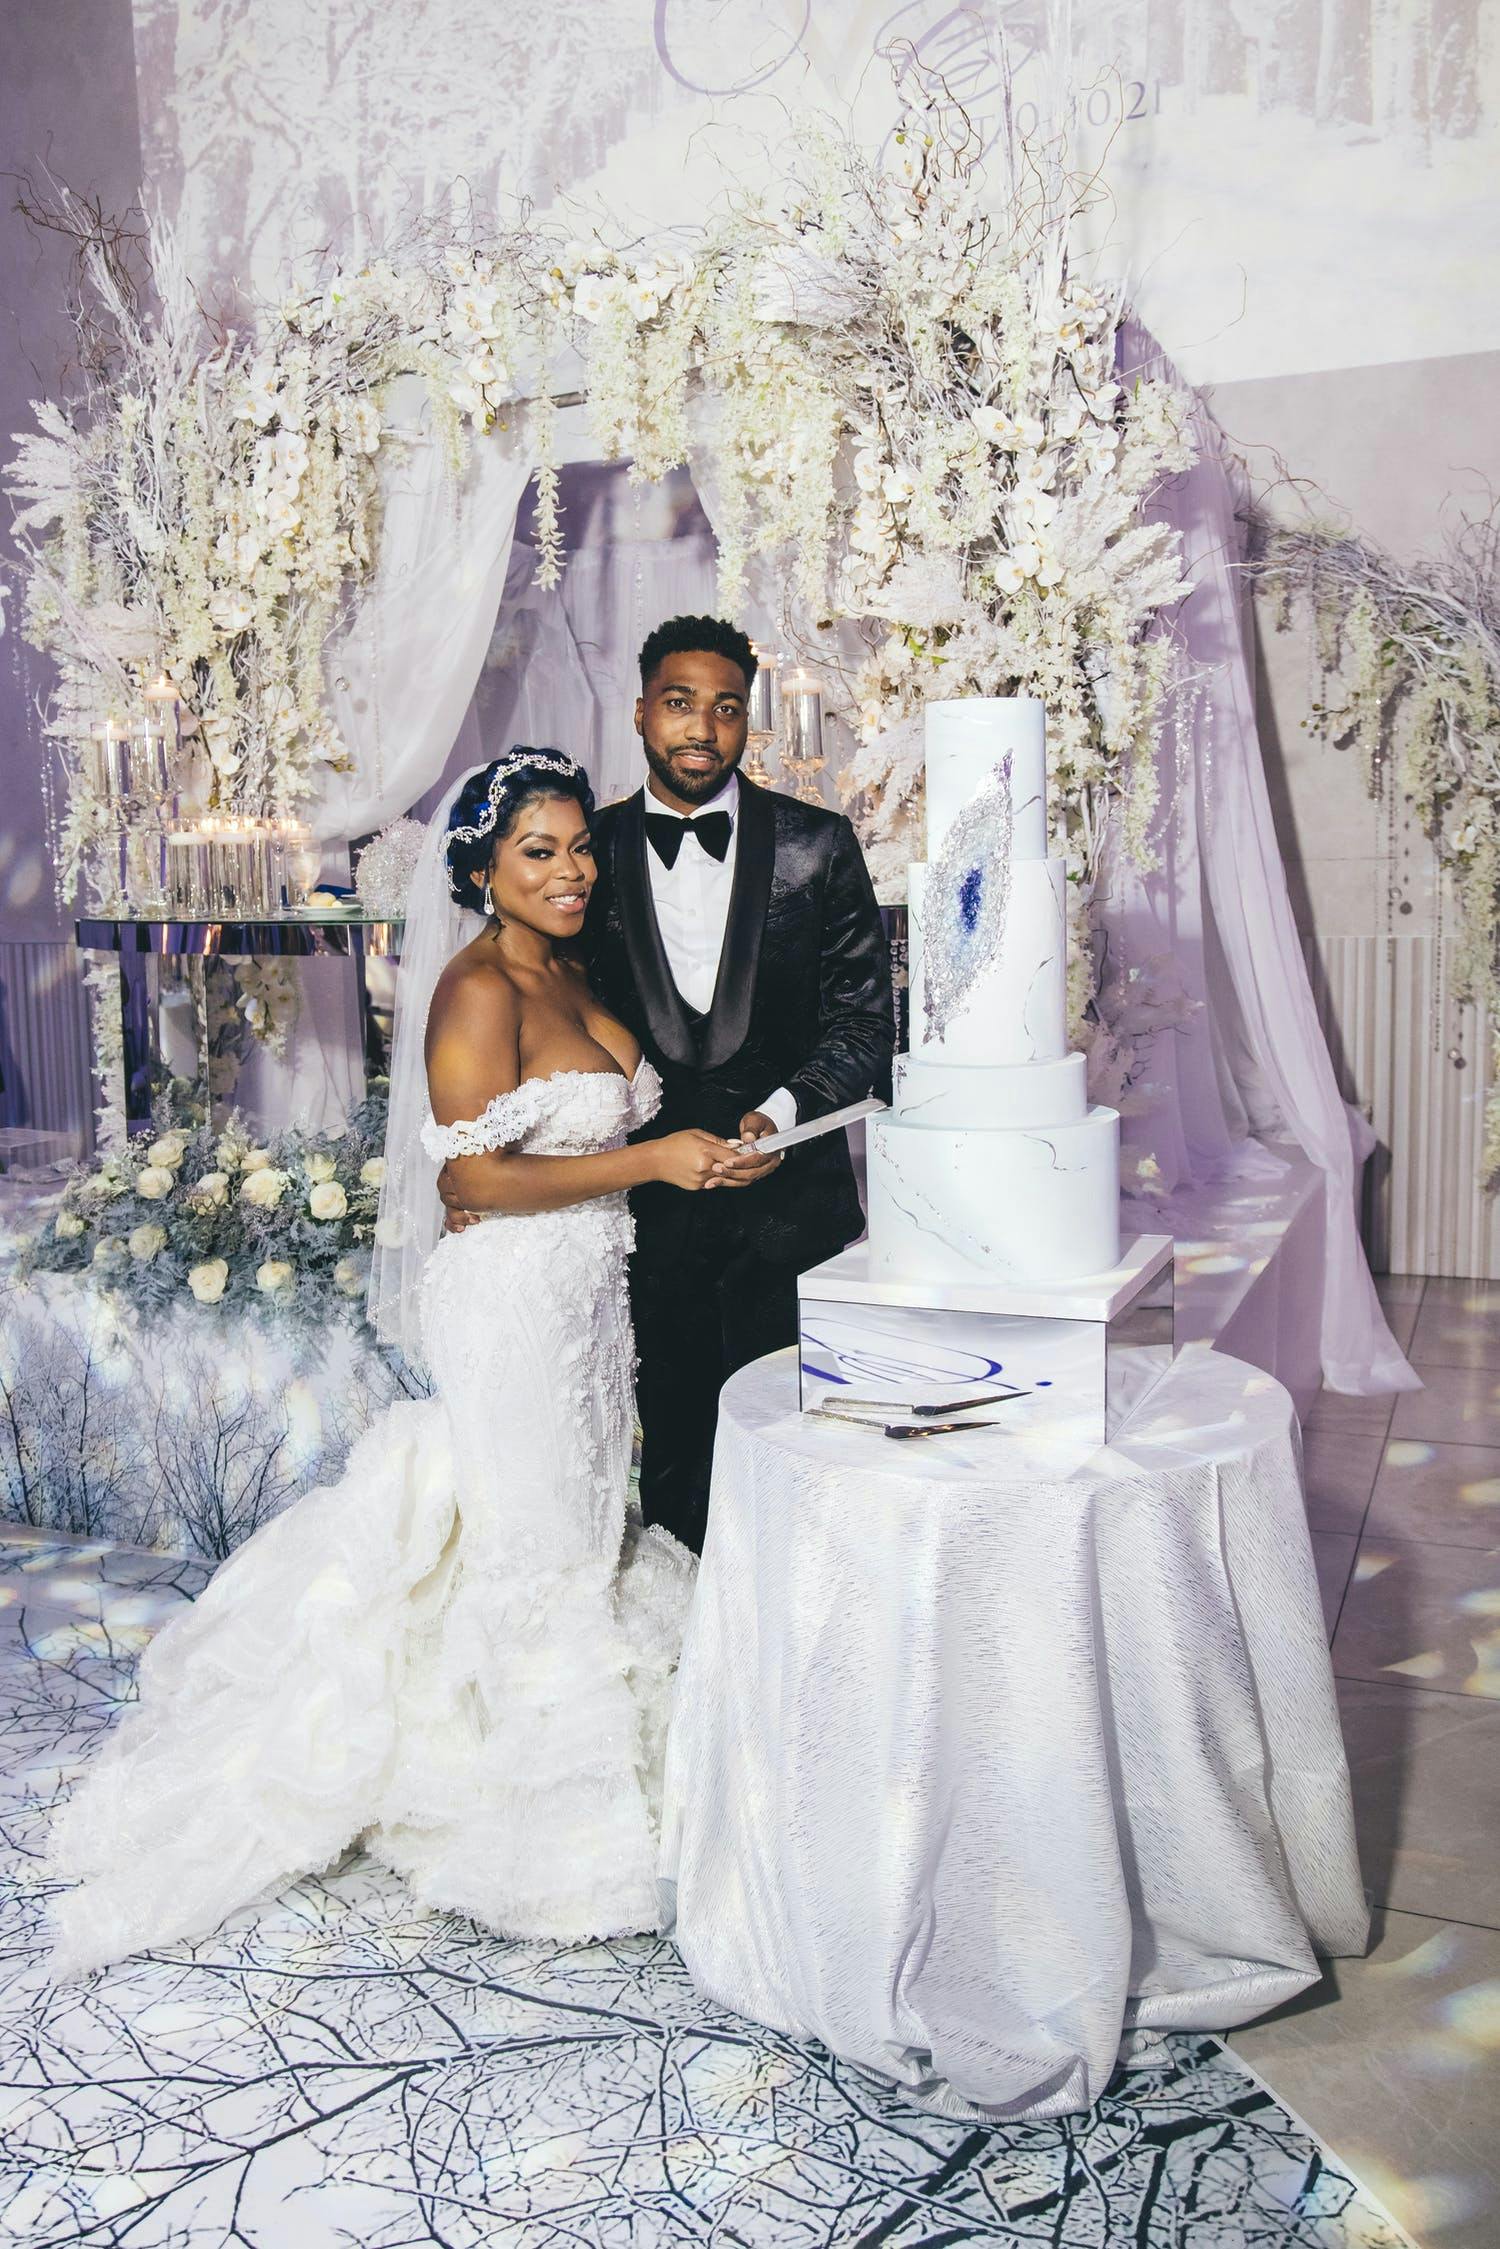 Bride and groom cut into white geode cake at winter wonderland wedding | PartySlate